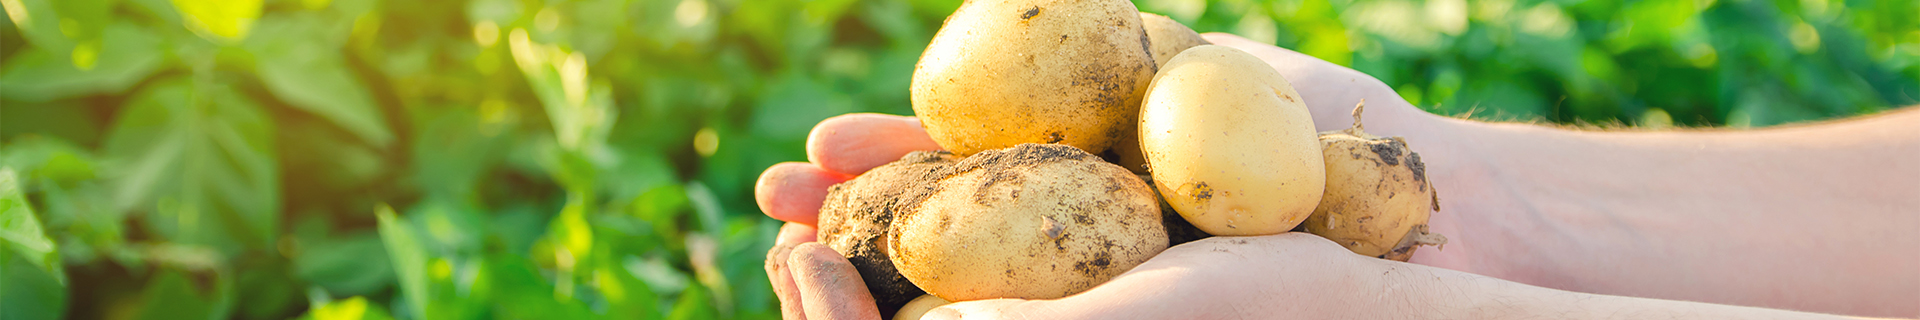 <p>How to grow potatoes in 5 simple steps</p>
